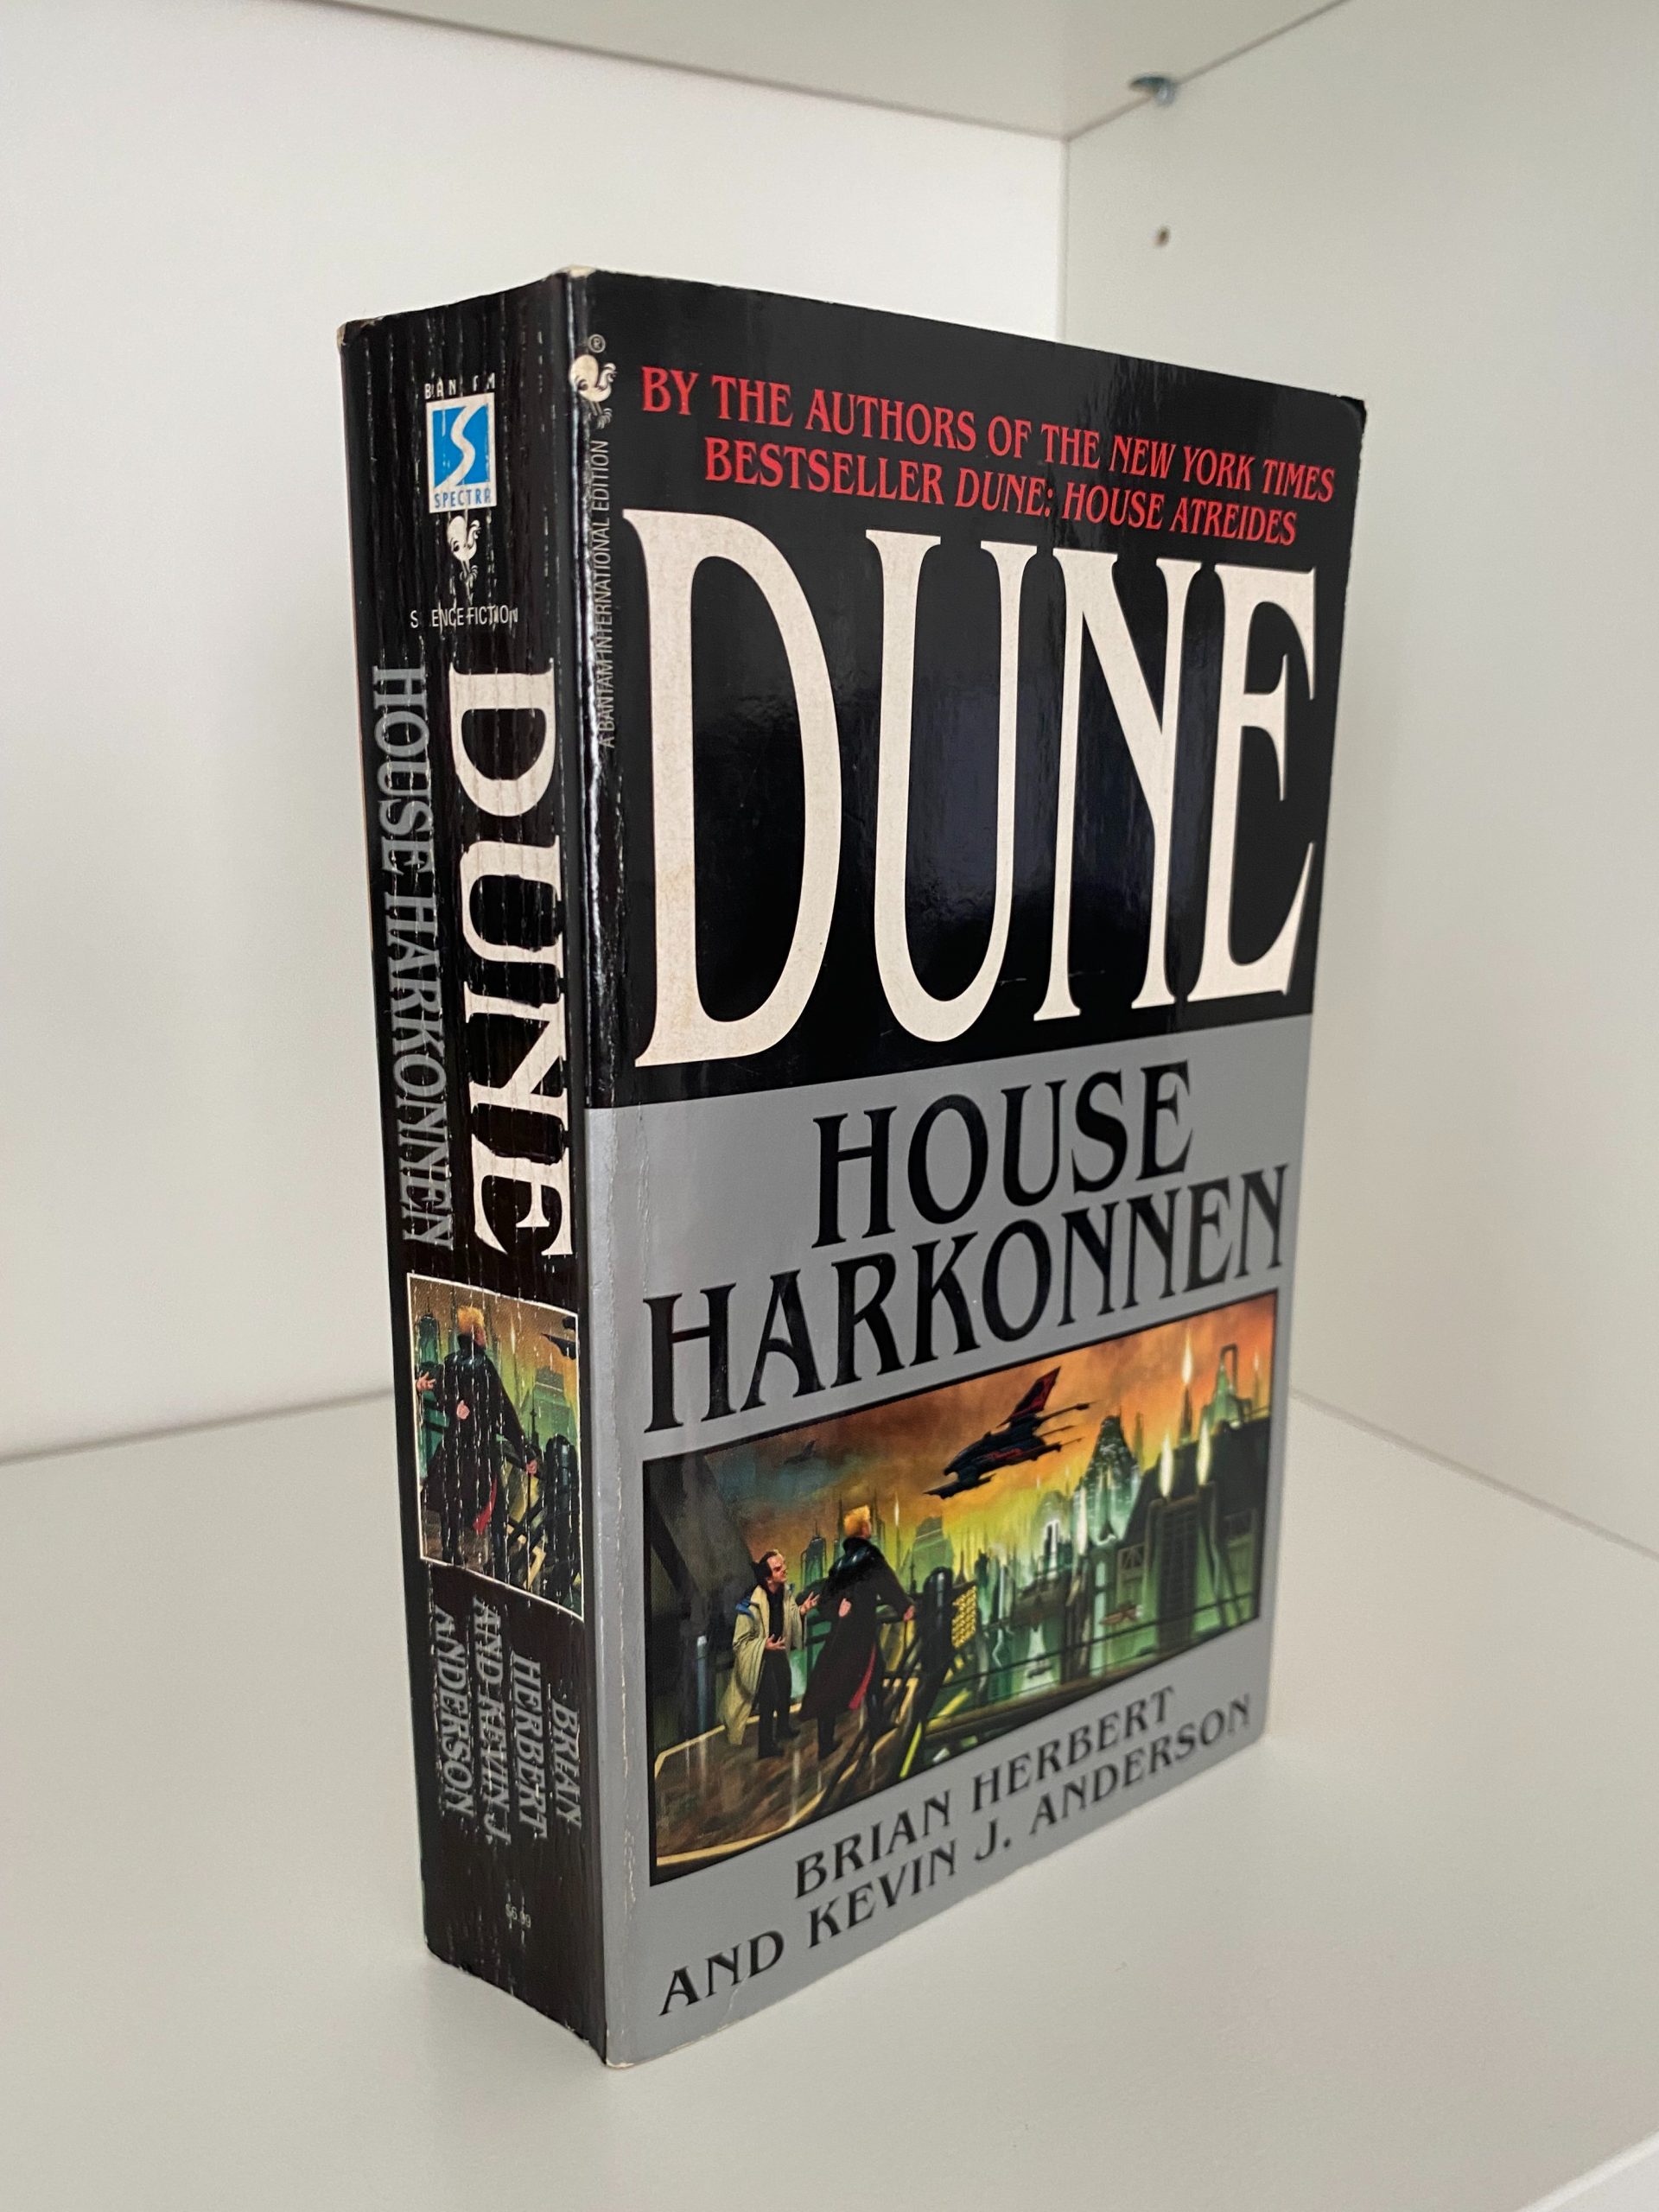 House Harkonnen: Prelude to Dune by Brian Herbert and Kevin Anderson